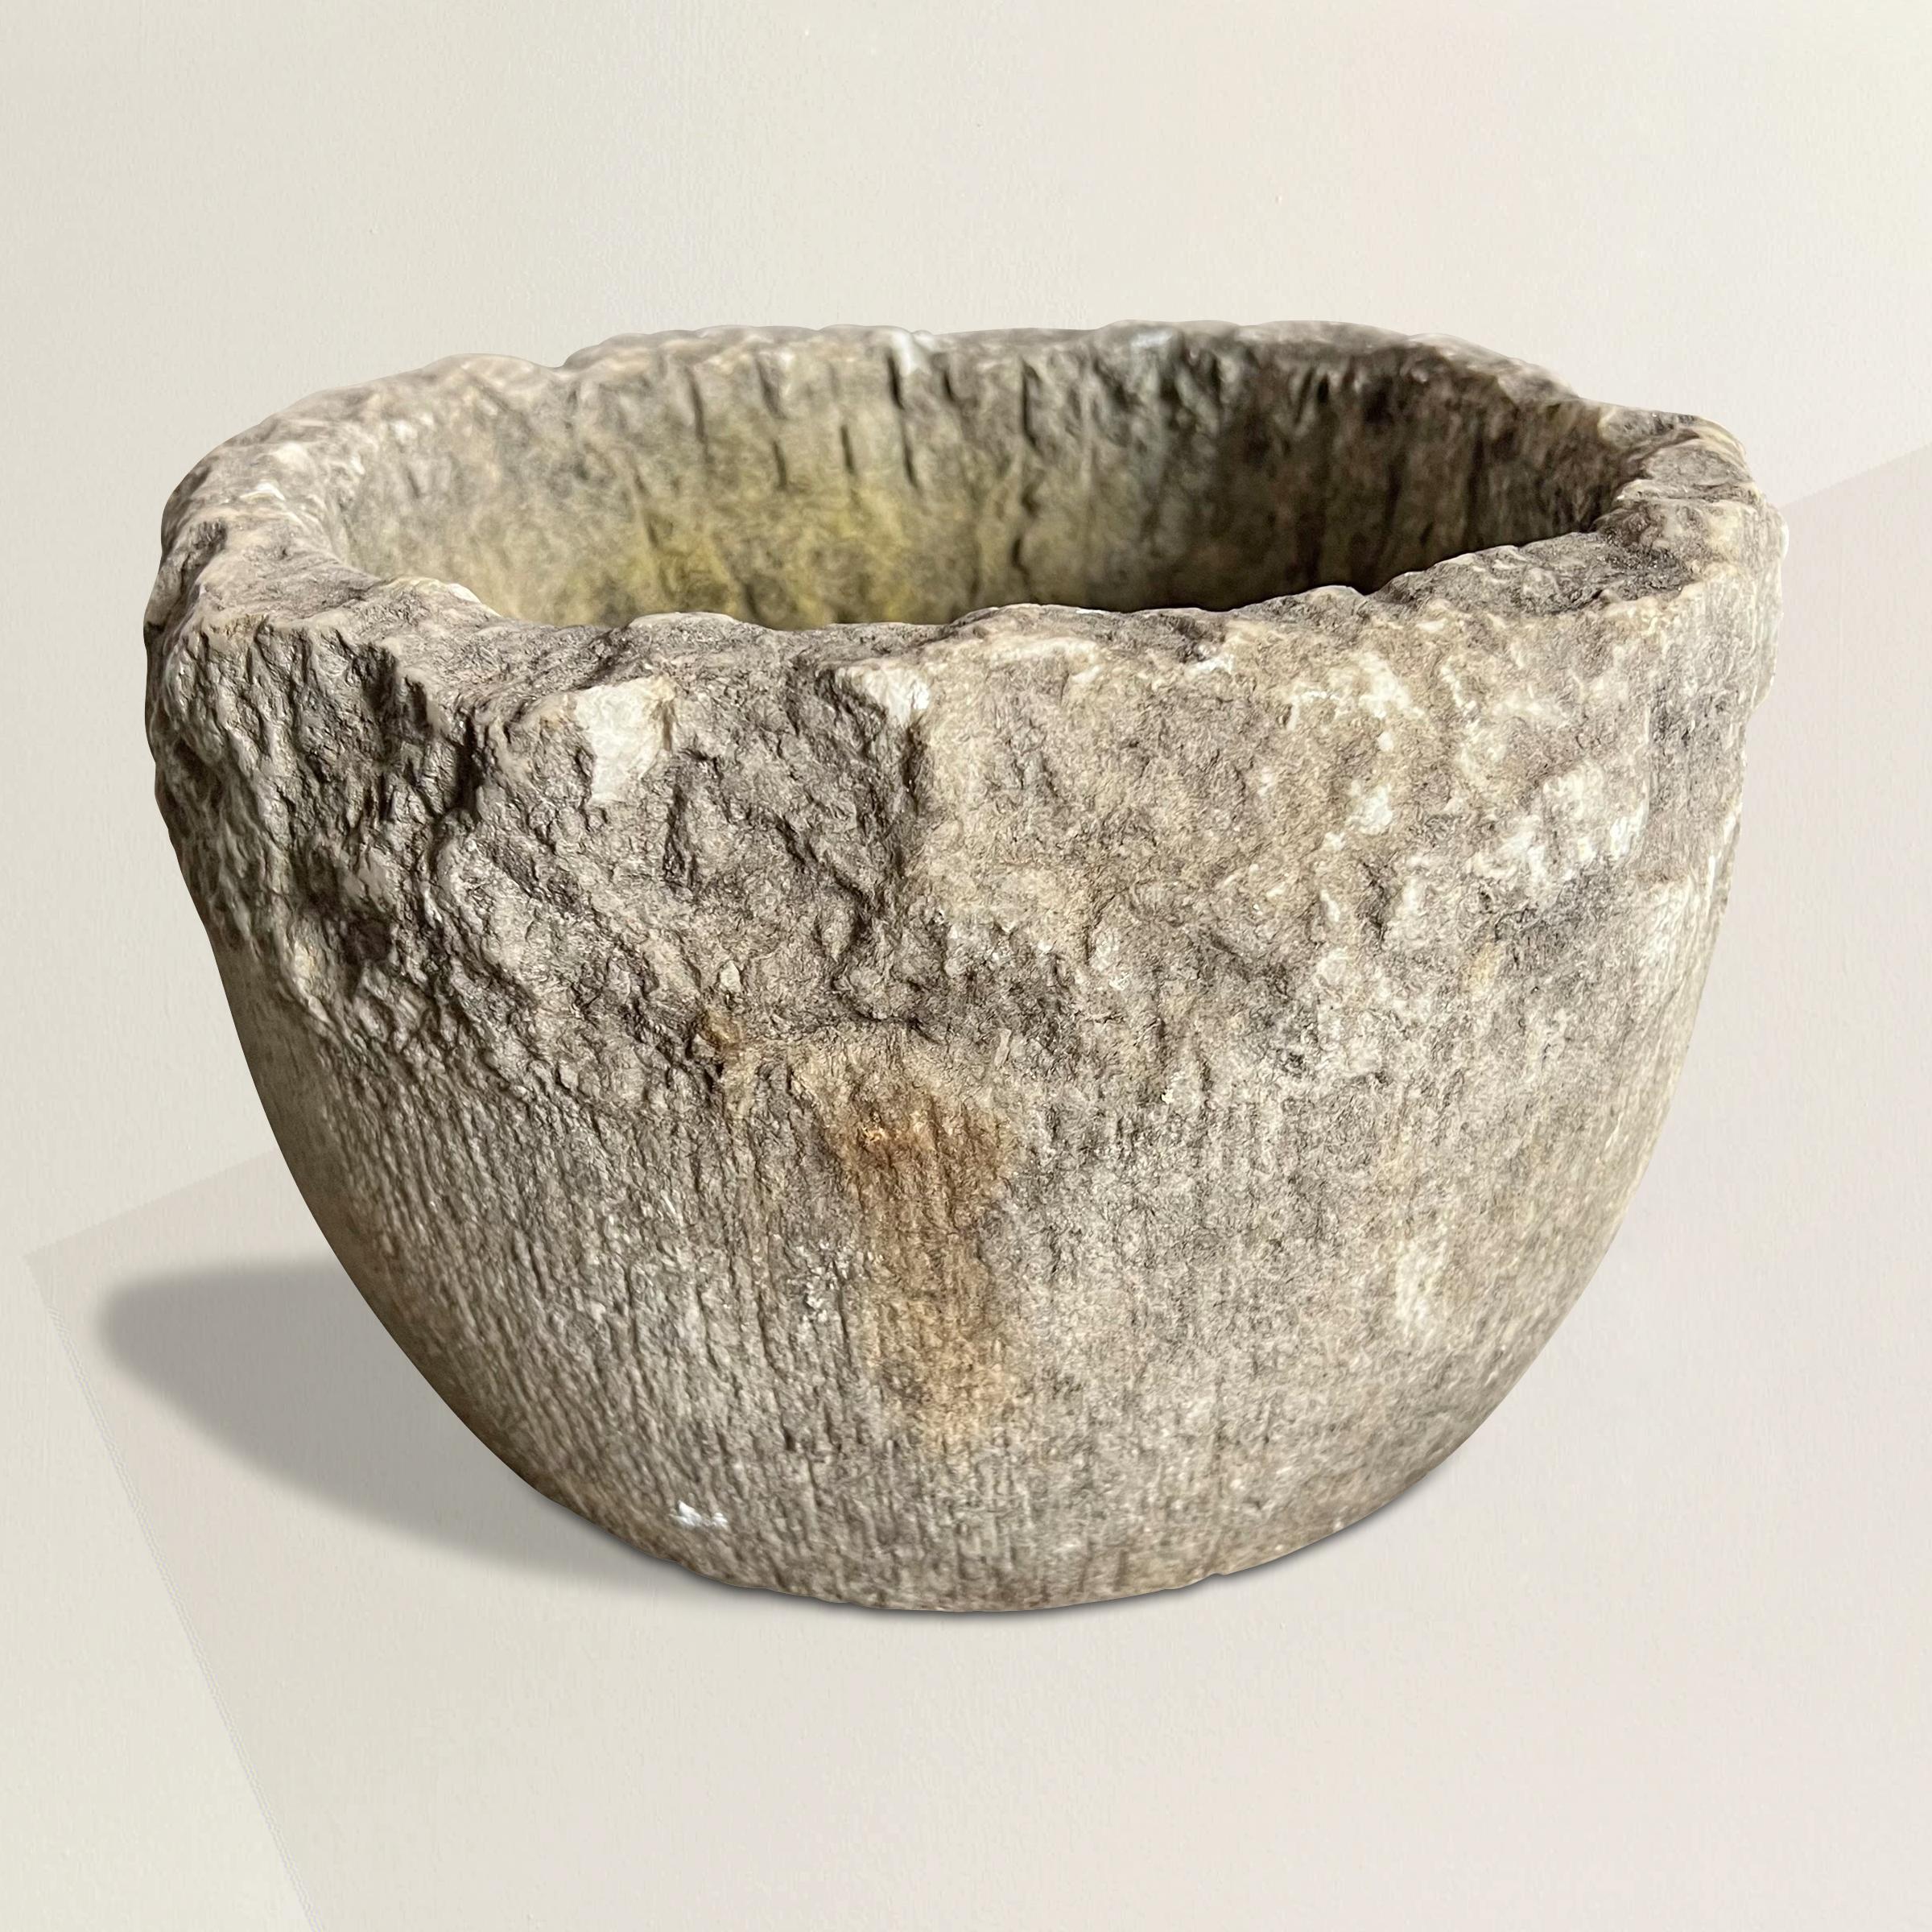 A simple yet chic 20th century hand-carved limestone planter with the most wonderful rough-hewn surface. Perfect for planting your favorite annuals or herbs to keep on your patio, or placed somewhere special in your garden.